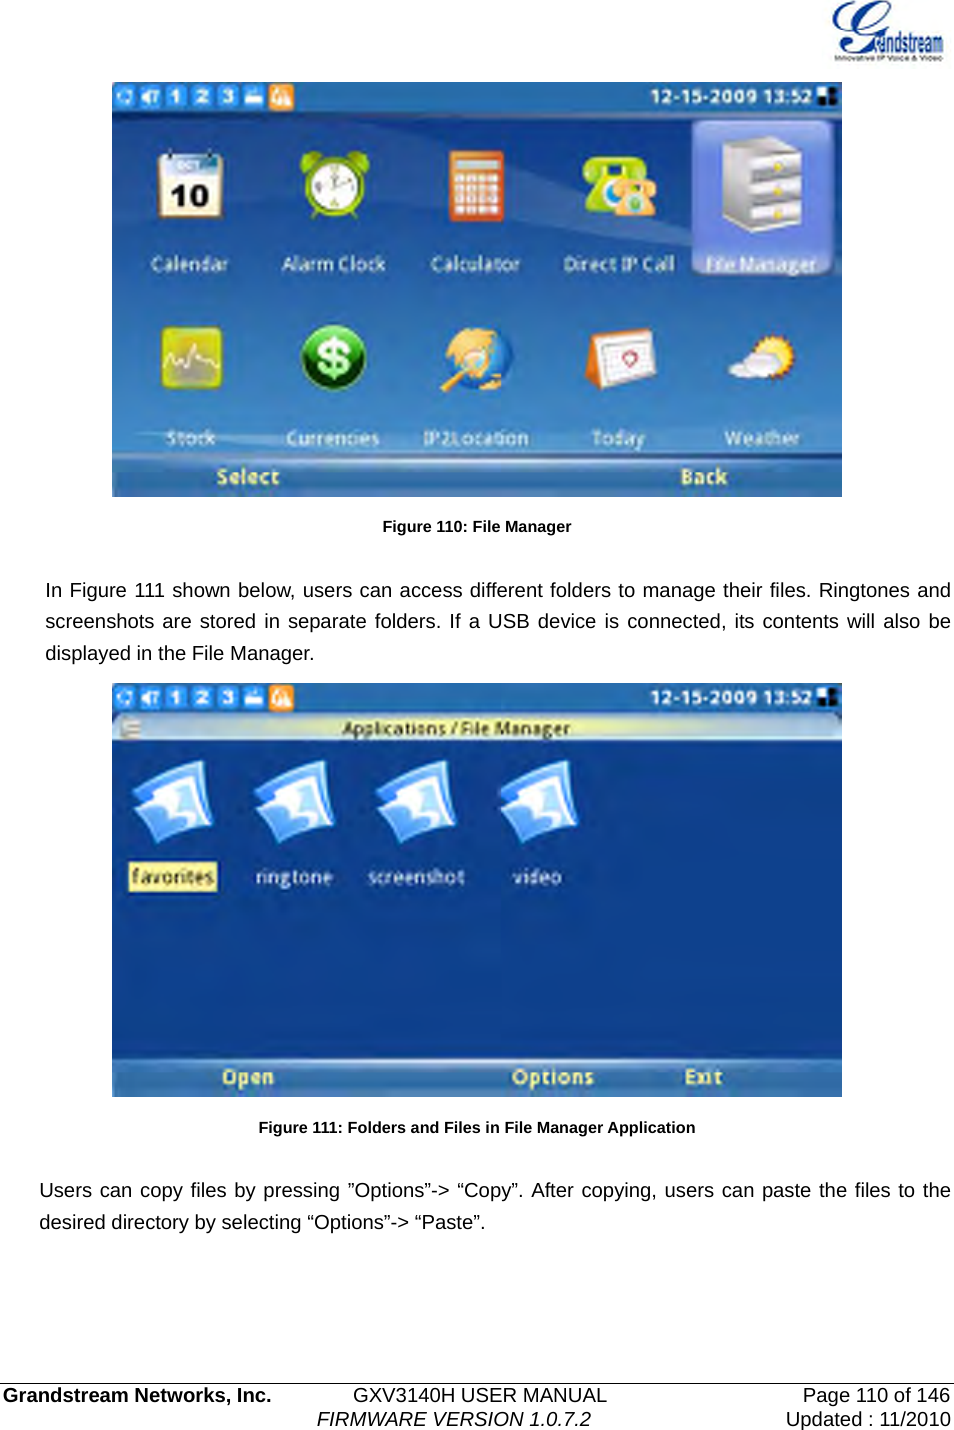   Grandstream Networks, Inc.        GXV3140H USER MANUAL                  Page 110 of 146                                FIRMWARE VERSION 1.0.7.2 Updated : 11/2010   Figure 110: File Manager  In Figure 111 shown below, users can access different folders to manage their files. Ringtones and screenshots are stored in separate folders. If a USB device is connected, its contents will also be displayed in the File Manager.  Figure 111: Folders and Files in File Manager Application  Users can copy files by pressing ”Options”-&gt; “Copy”. After copying, users can paste the files to the desired directory by selecting “Options”-&gt; “Paste”.    